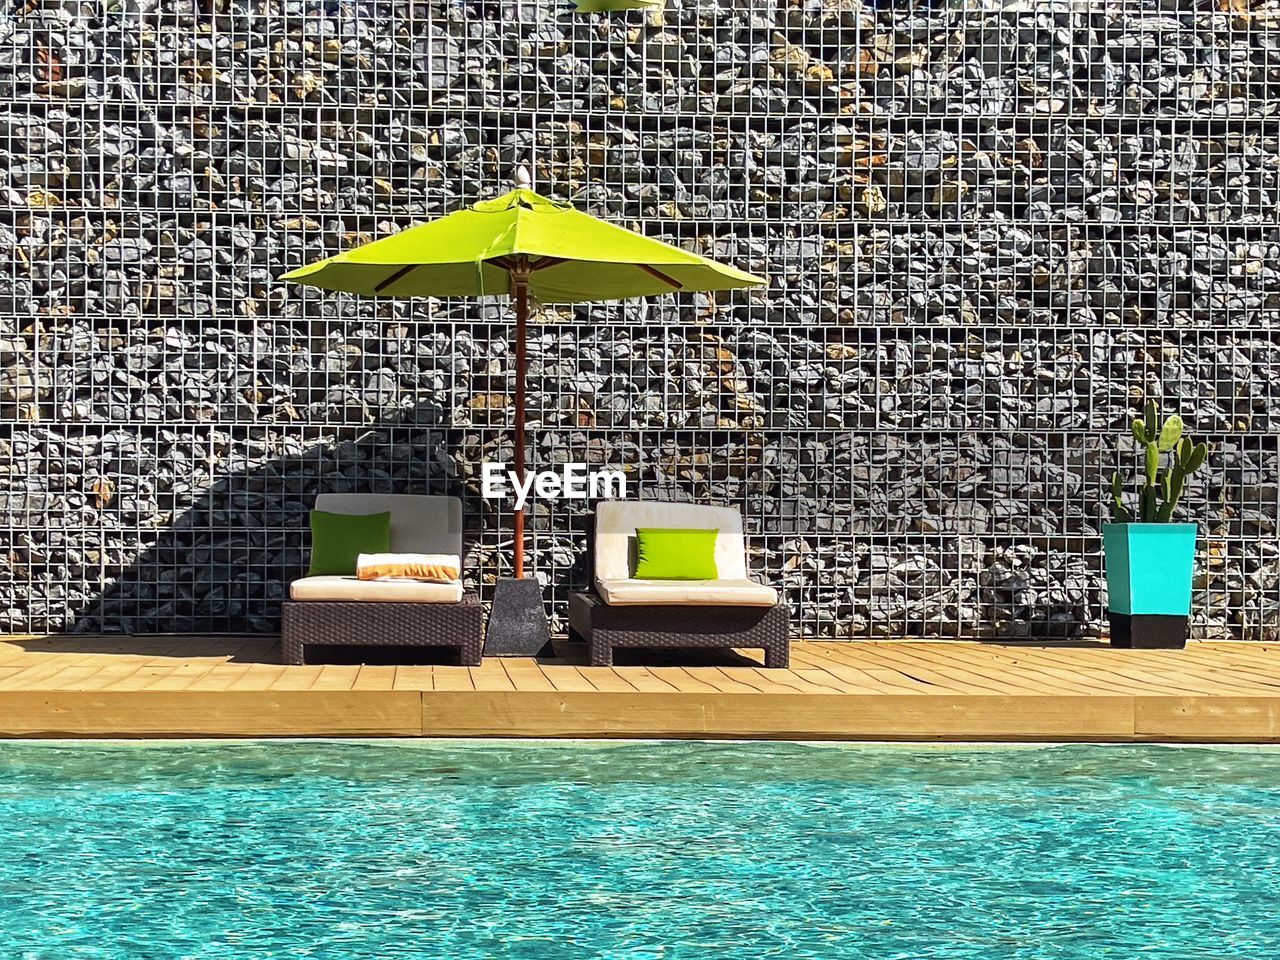 water, umbrella, swimming pool, nature, protection, parasol, day, lounge chair, sunshade, security, chair, outdoors, no people, travel destinations, summer, relaxation, architecture, vacation, trip, sunlight, tourist resort, holiday, poolside, furniture, travel, wealth, beach umbrella, luxury, hotel, seat